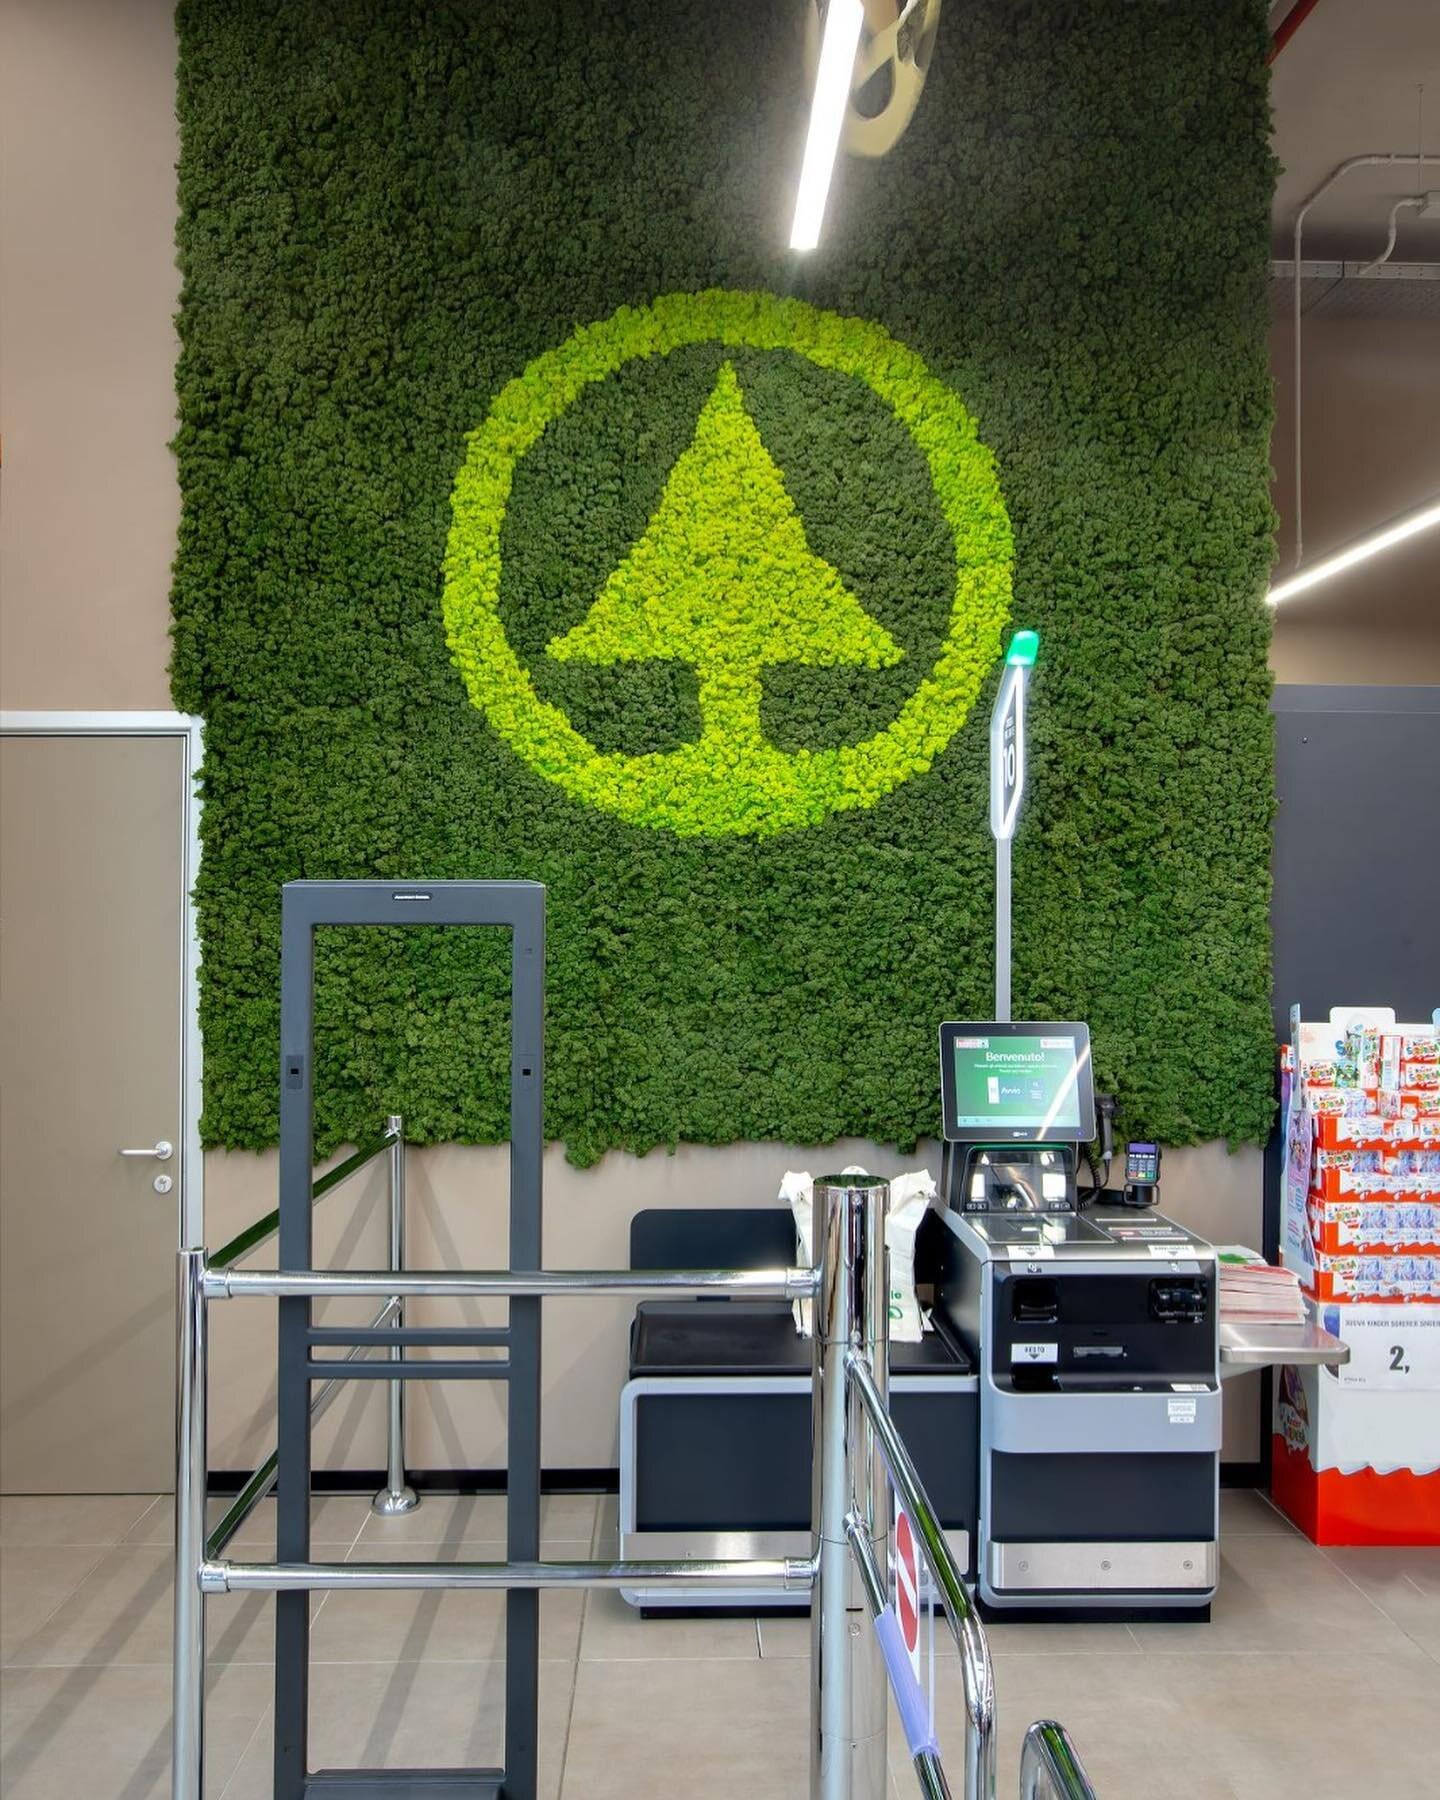 ✳️✳️✳️
A wall of MOSSwall was placed inside the supermarket near the checkouts.

The mint-coloured wall features the Despar logo in the centre, which is also made of wasabi-coloured stabilized moss.
@verdeprofilo 

✳️✳️✳️

.

#mosswall #moss #greenwa